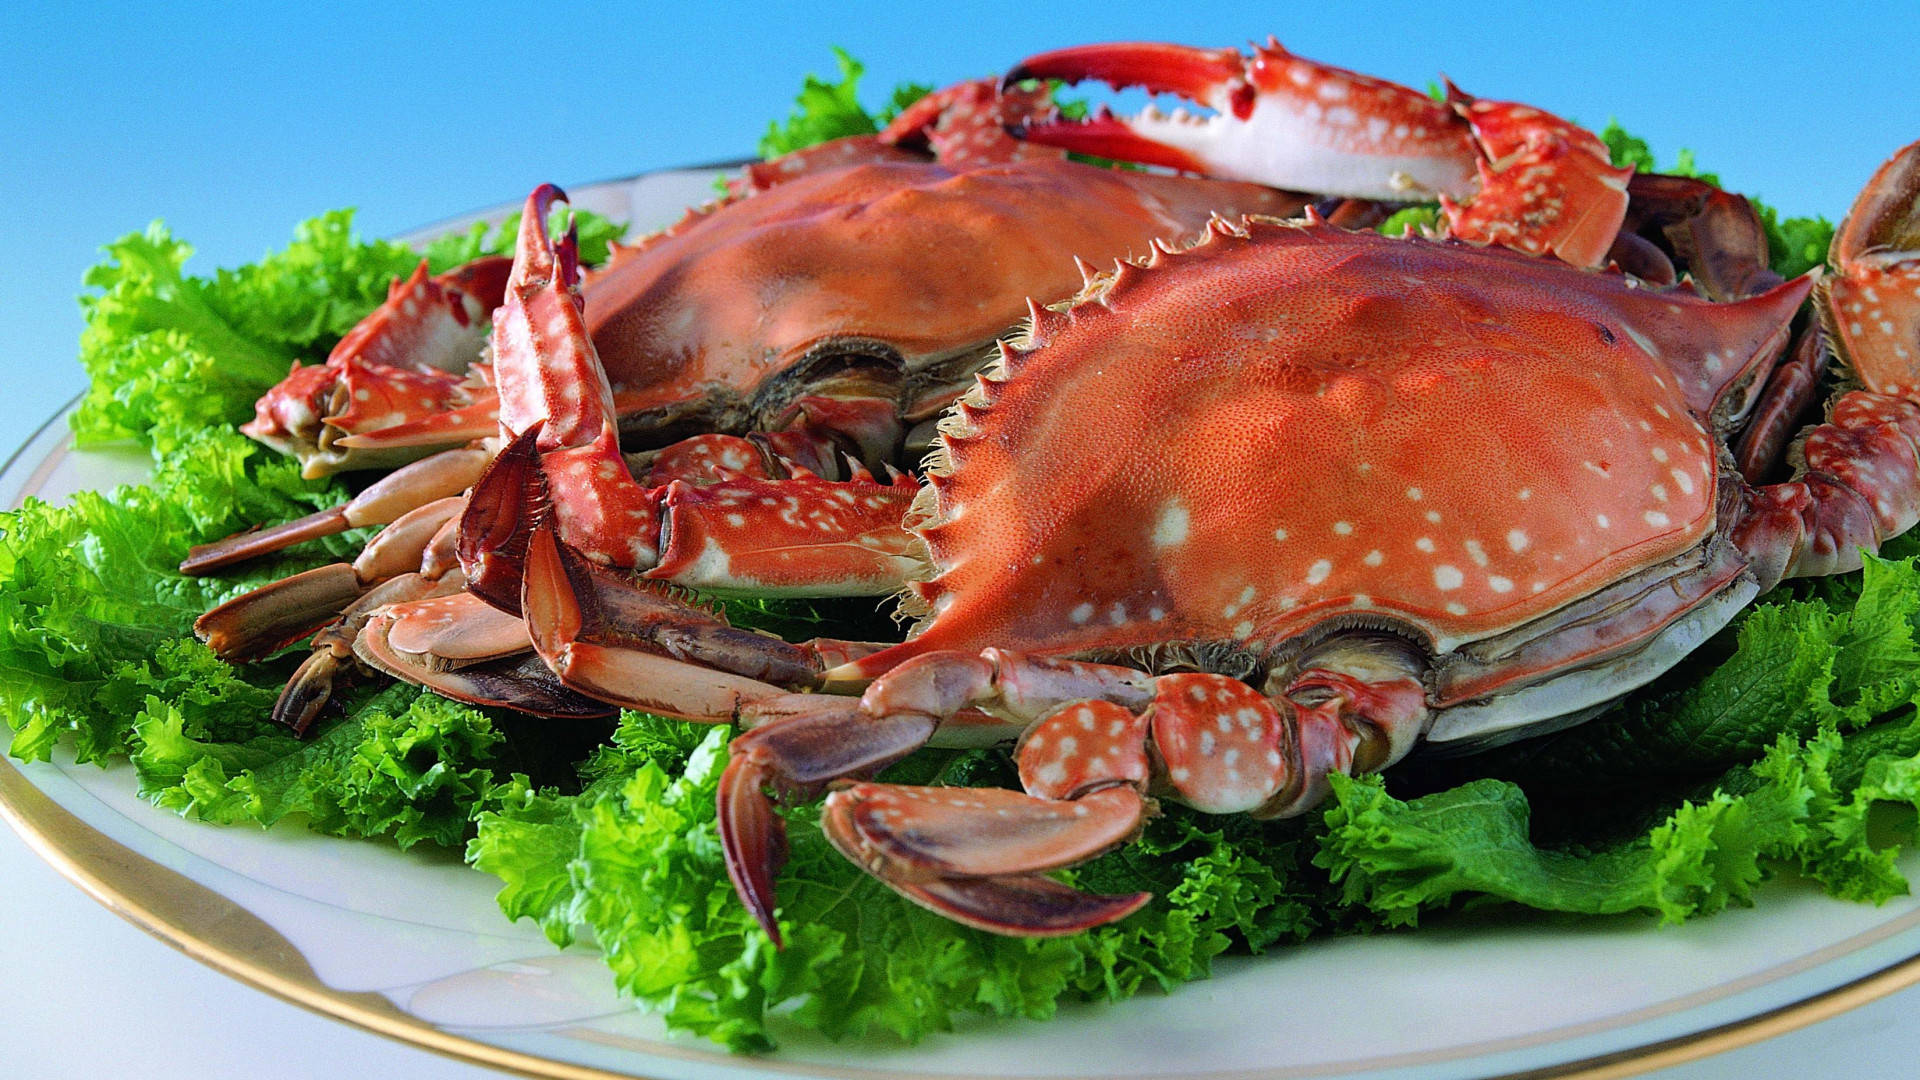 Crab And Lettuce On Plate Wallpaper